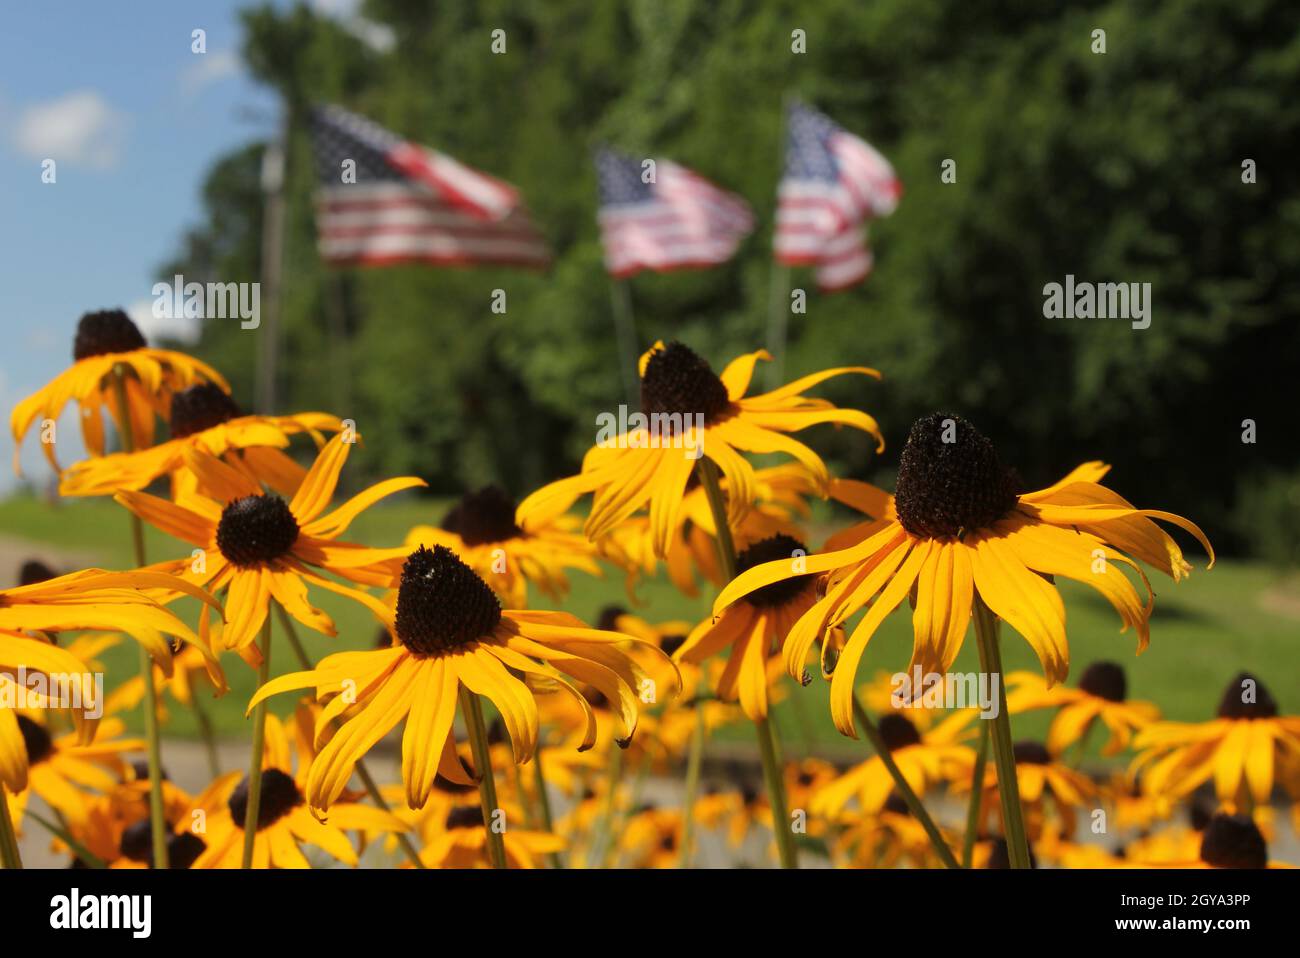 Wildflowers and American Flags, Shallow DOF Stock Photo